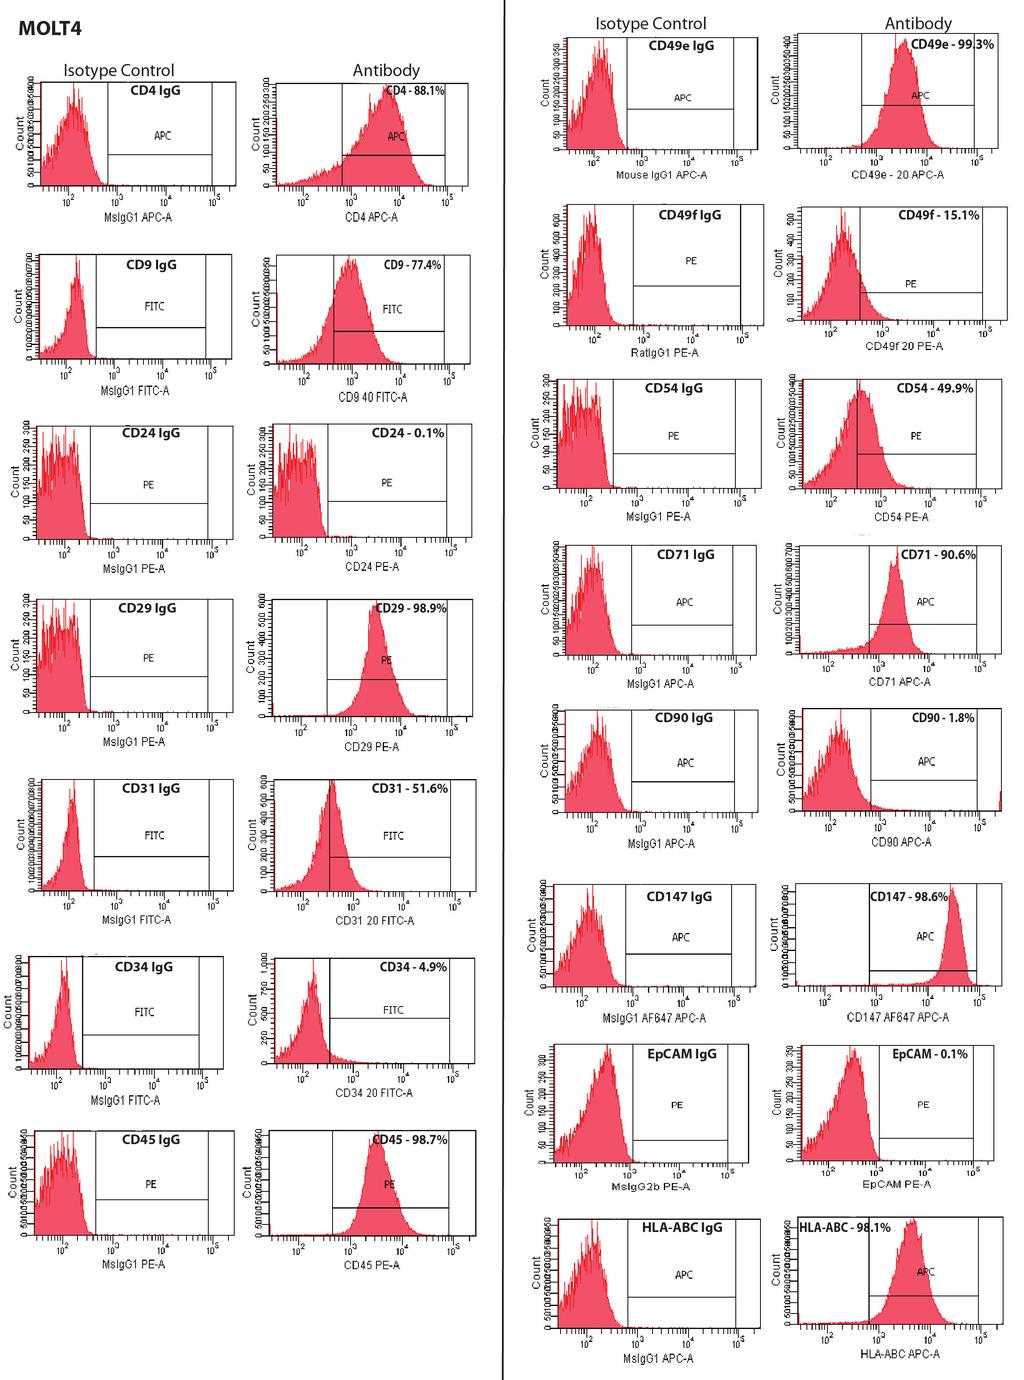 Supplemental Figure 1B: Histograms from flow cytometry demonstrating the percentage of MOLT-4 leukemic cells that stained positively for